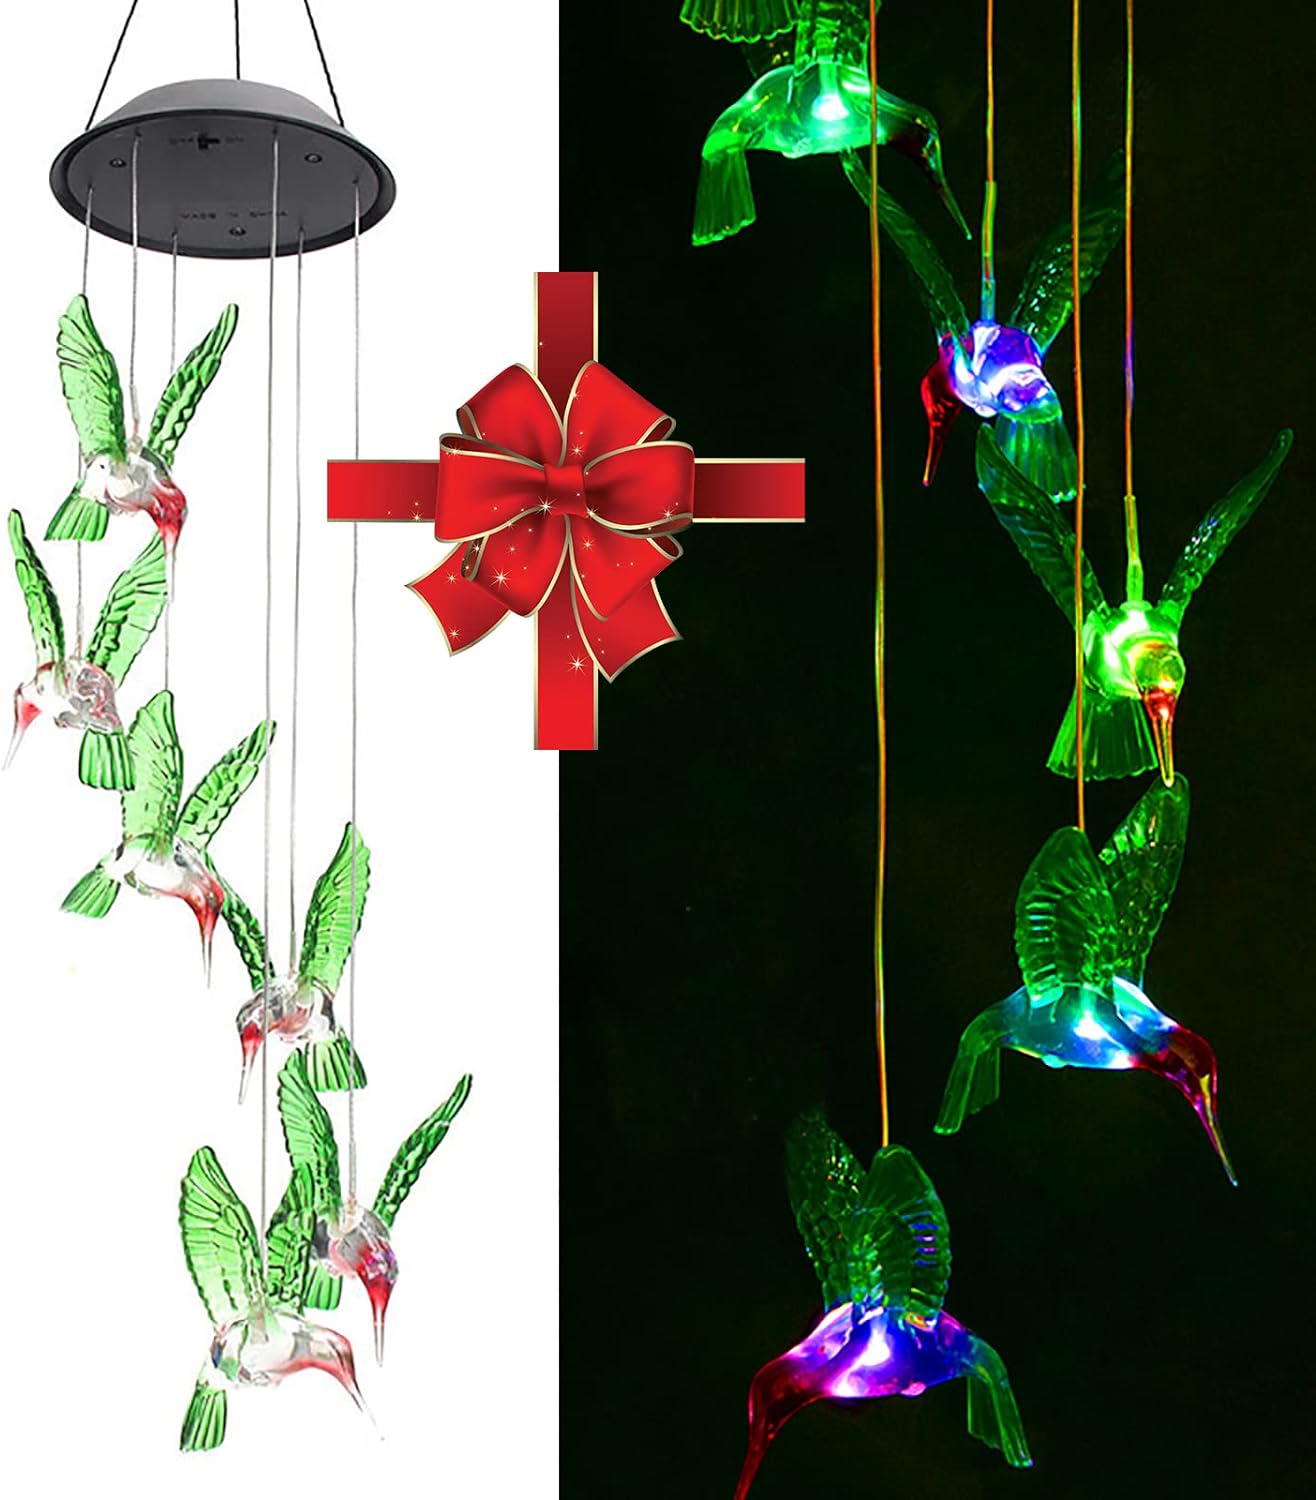 Gifts for Mom, Hummingbird Wind Chimes, ZOUTOG Color Changing LED Mobile Solar Wind Chimes, Waterproof Outdoor Solar Lights for Home/Yard/Patio/Garden, Gift for Women/Older Women